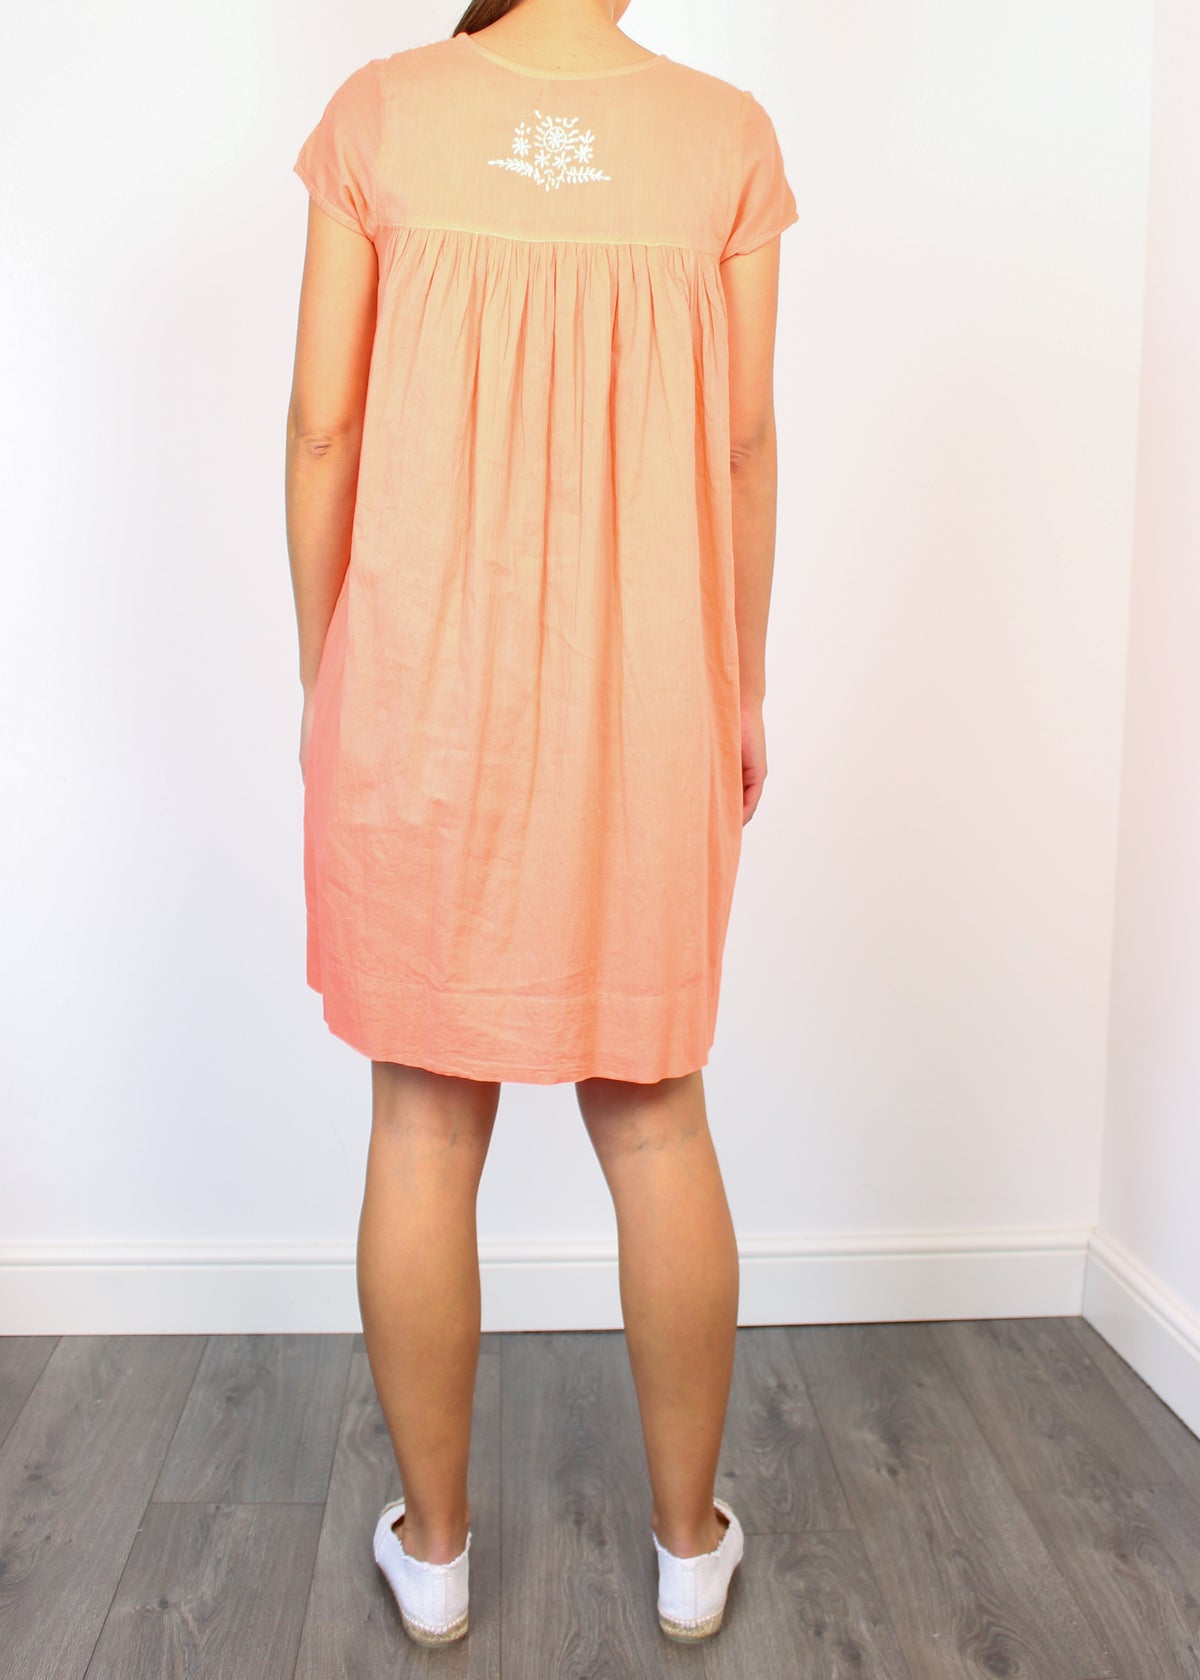 DREAM Beatrice Dress in Coral